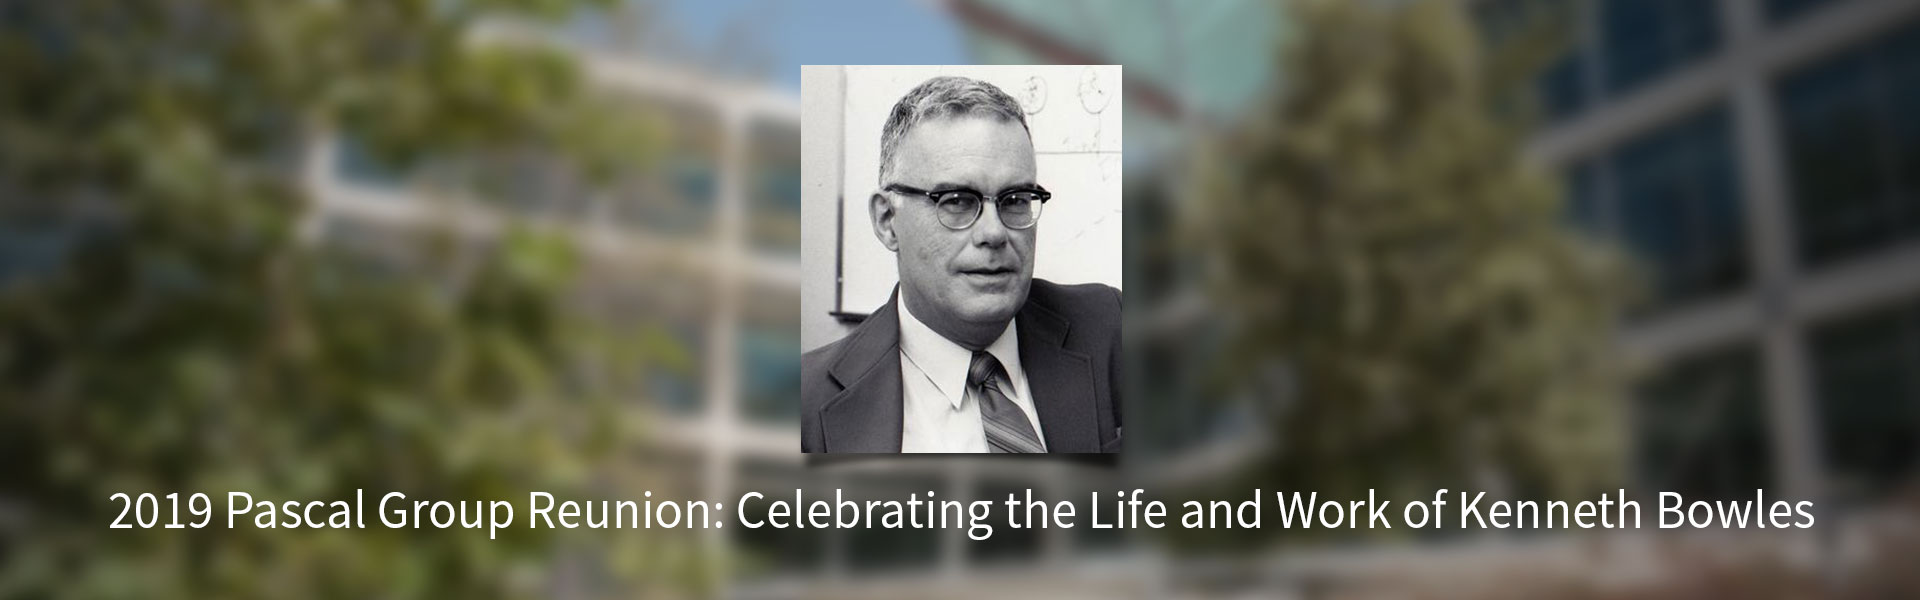 Celebration the life and work of Kenneth Bowles